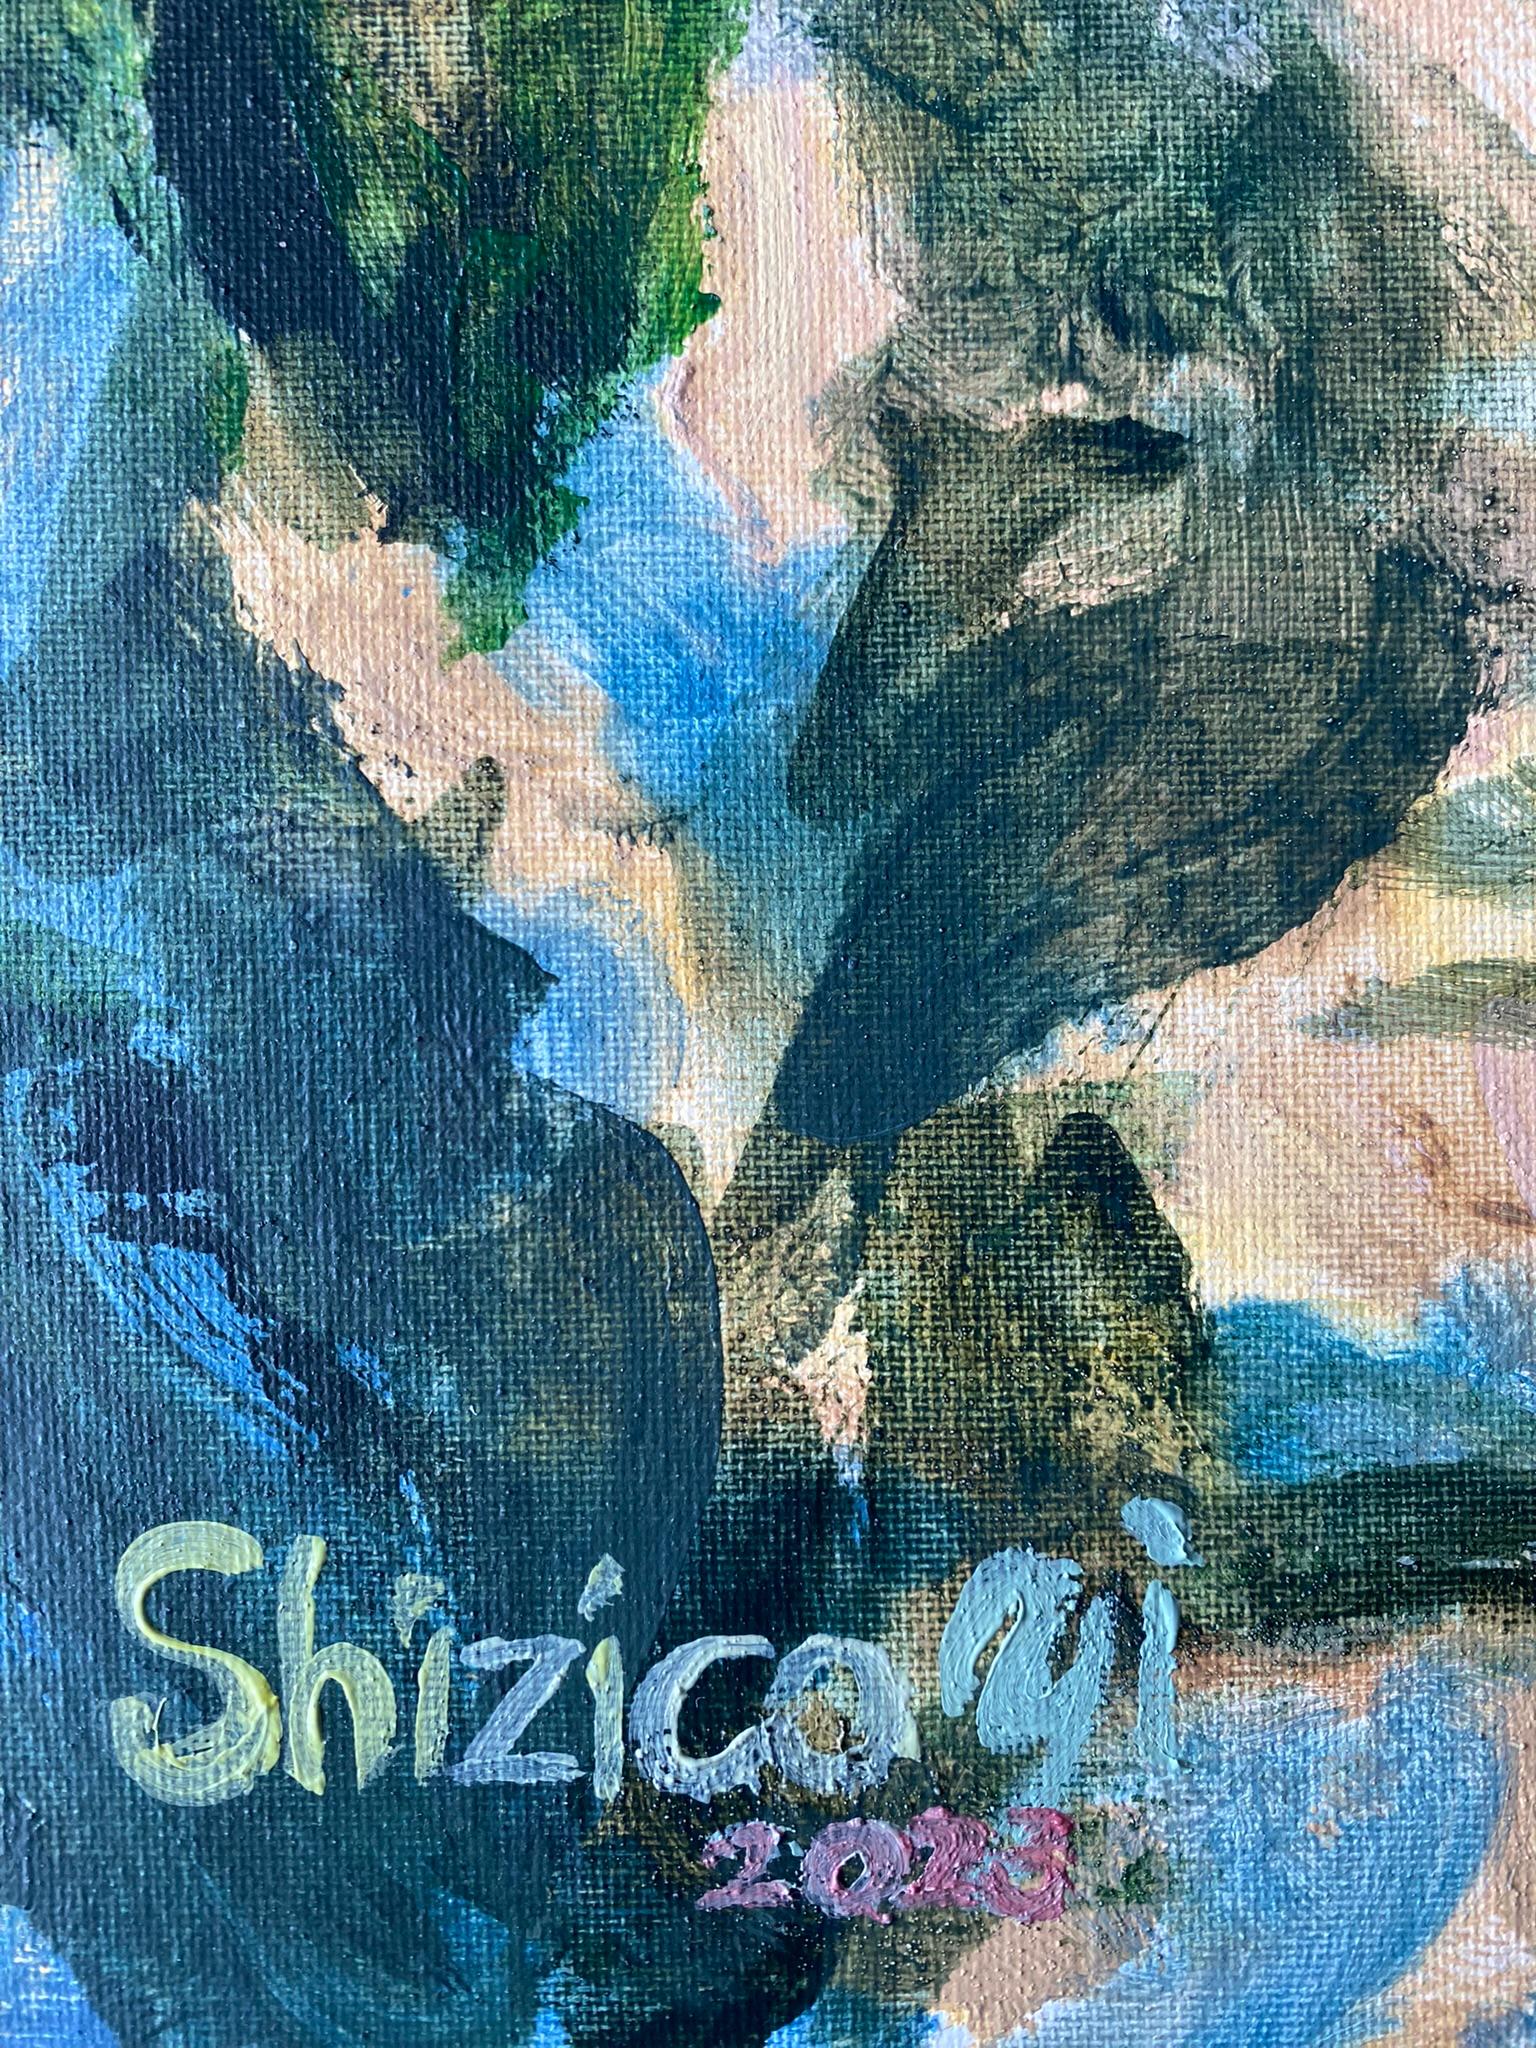 Original-Golden Morning Light-Expressionist-flora-landscape-UK-awarded Artist  - Abstract Expressionist Painting by Shizico Yi